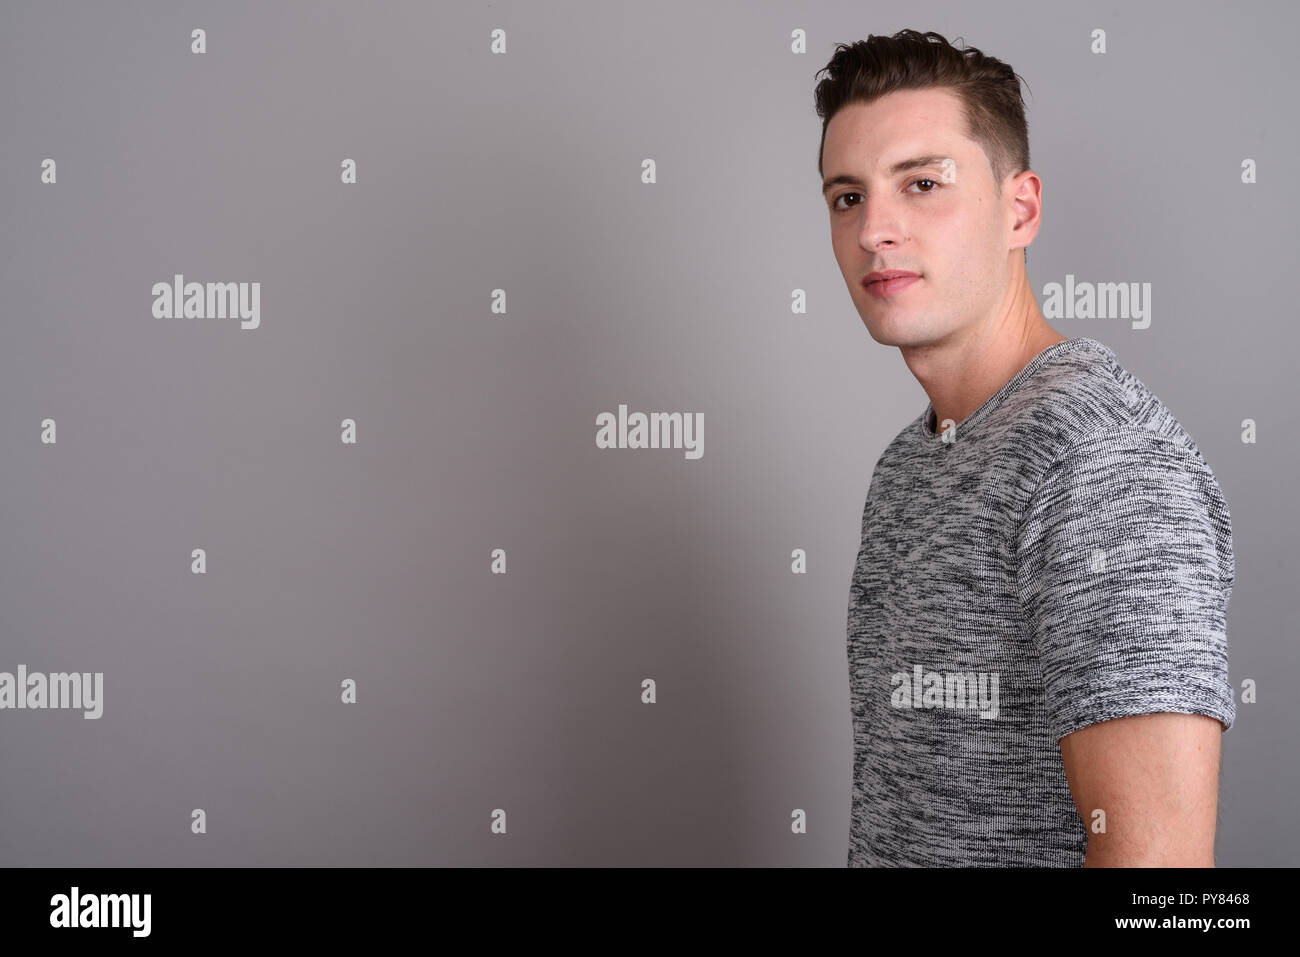 Young handsome man wearing gray shirt against gray background Stock Photo